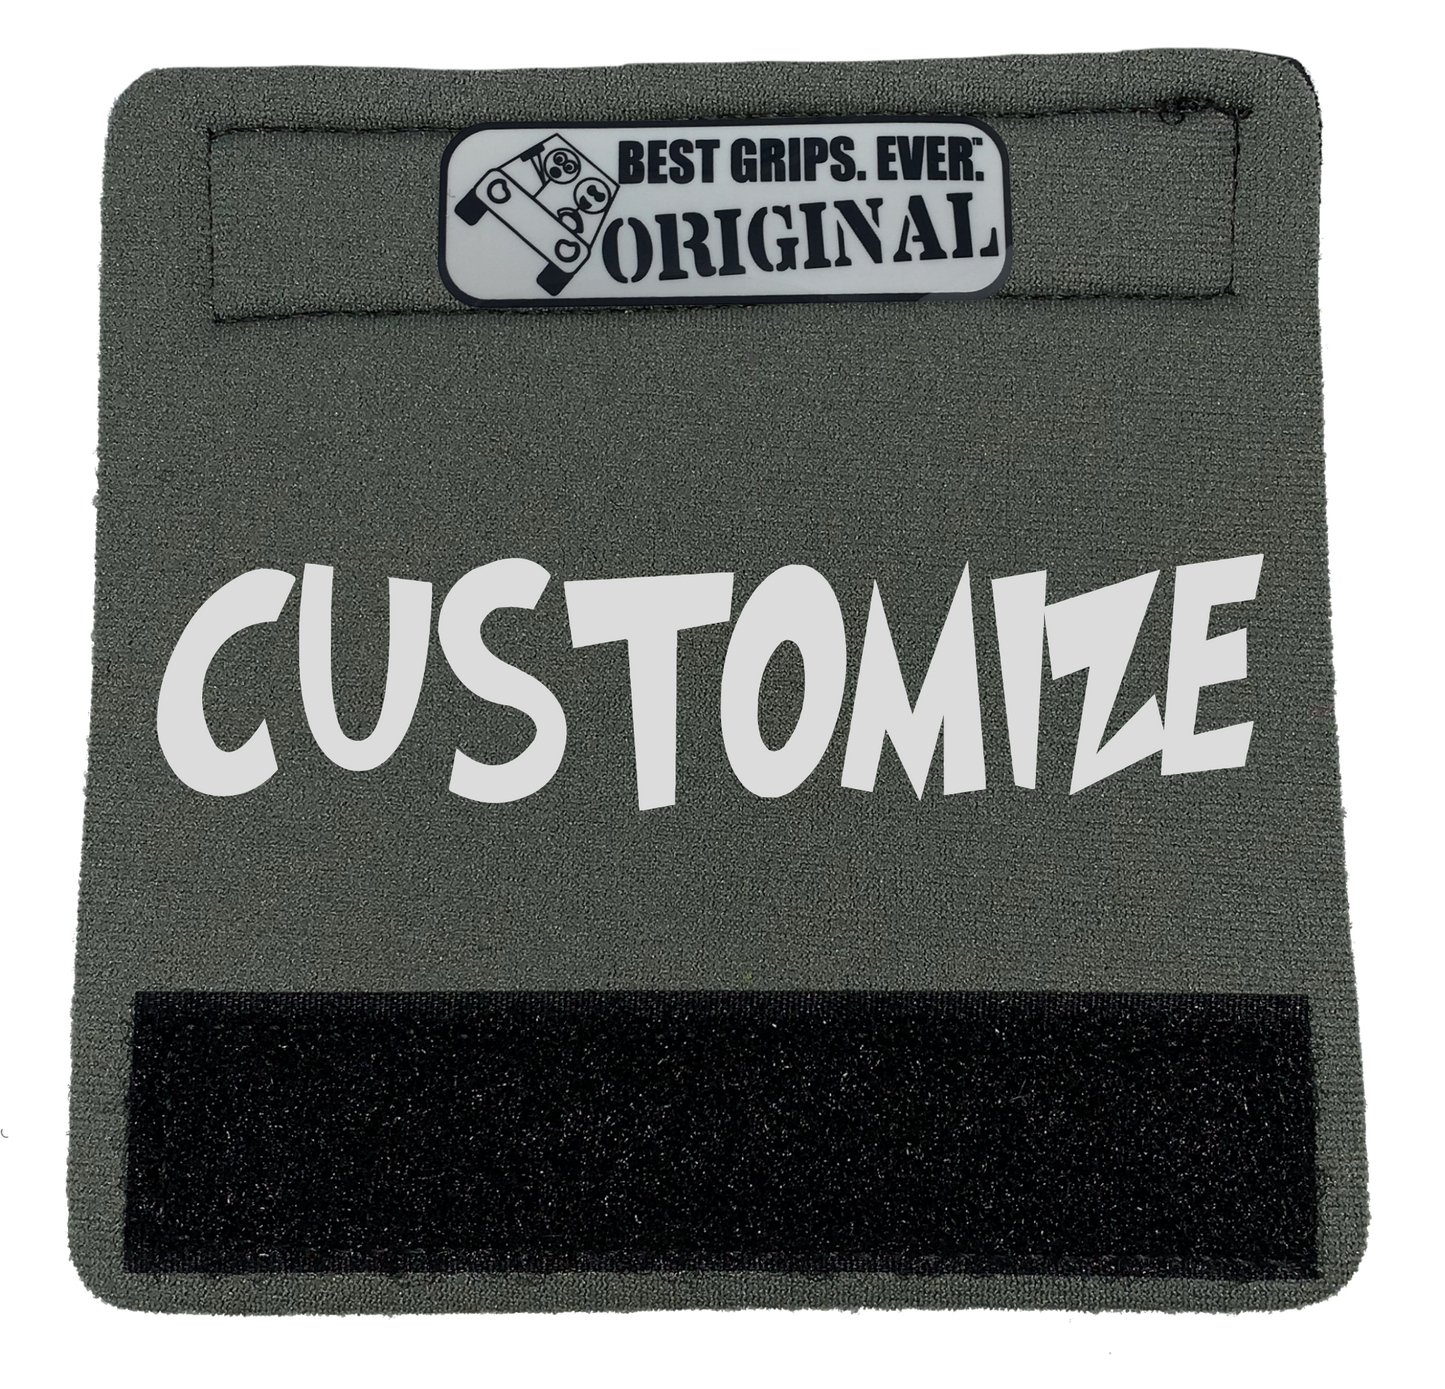 The Custom Grip. (3 Color) - BEST GRIPS. EVER.®